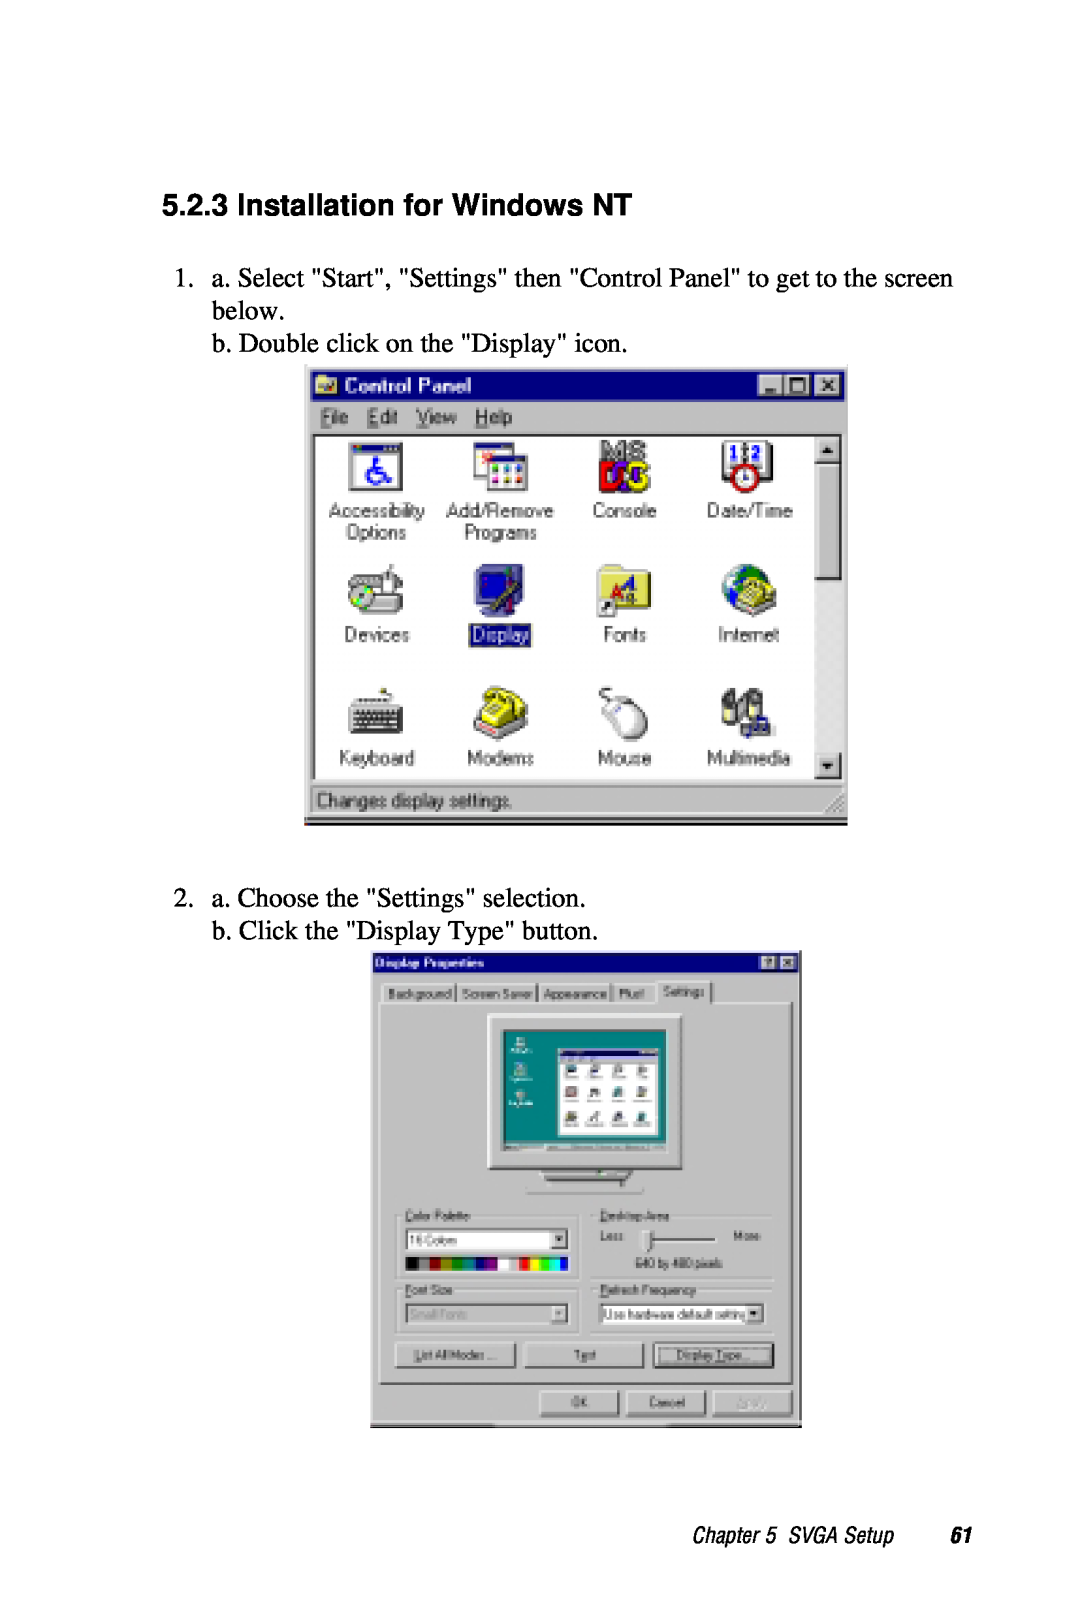 AMD PCM-5820 manual Installation for Windows NT, b. Double click on the Display icon, SVGA Setup 